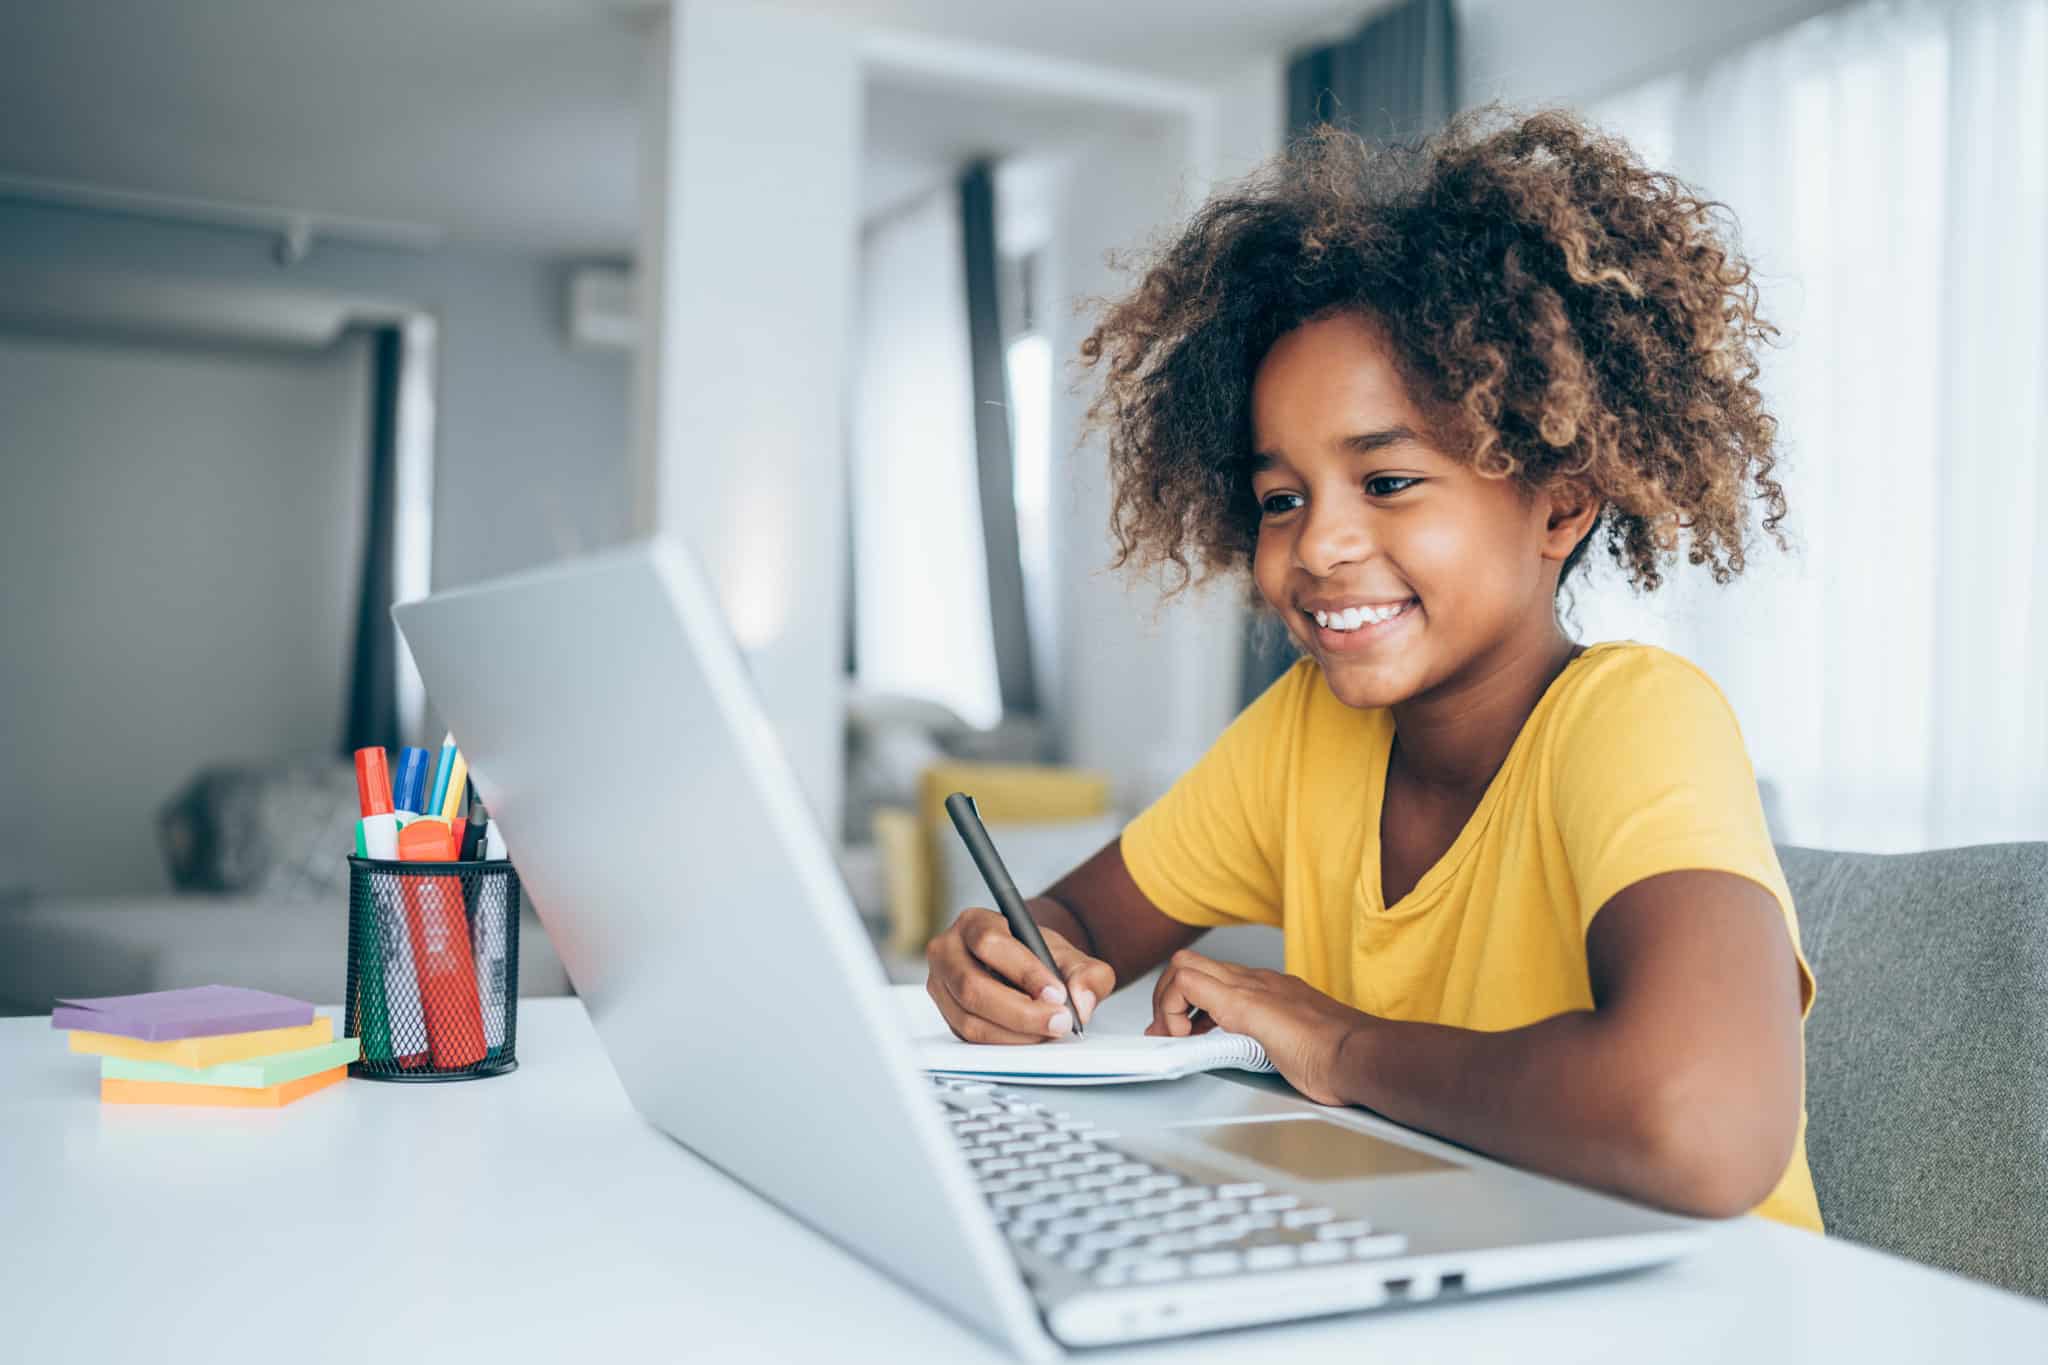 Young girl sitting at a laptop and taking notes.